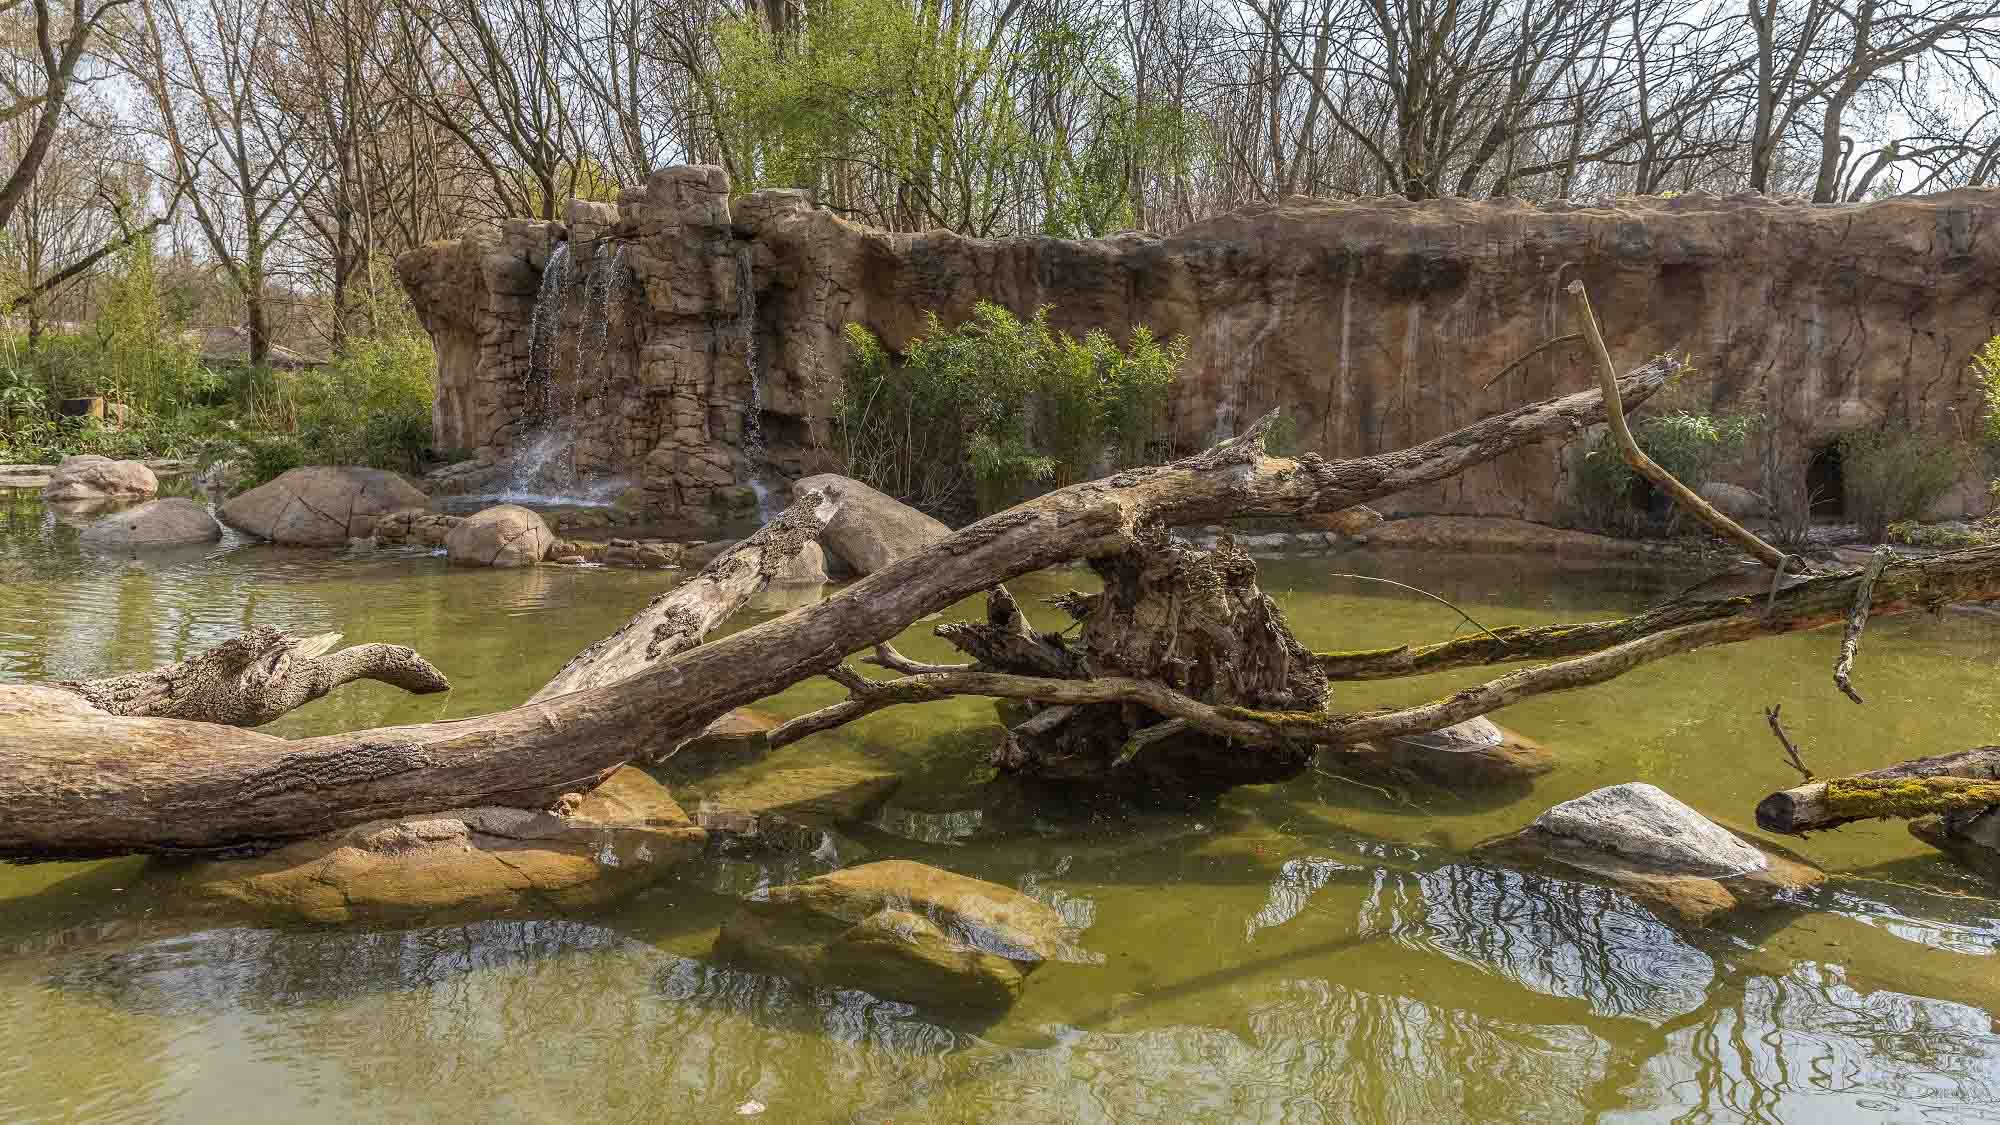 Otters And Monkeys Enjoy New GBP 1.2 Million Enclosure At Berlin Zoo